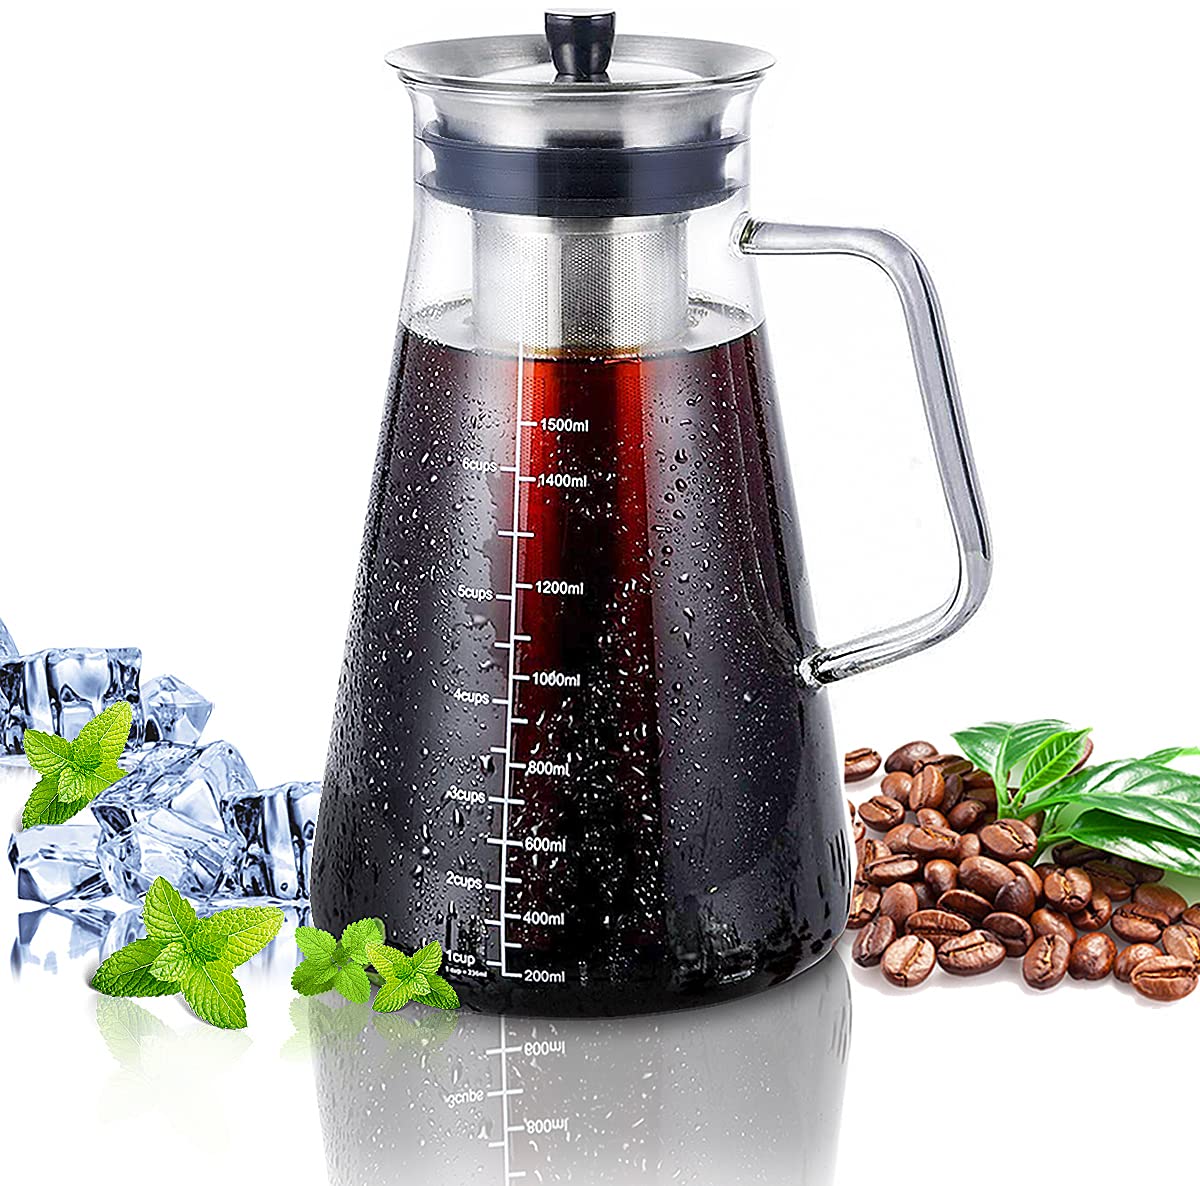  Coffee Gator Cold Brew Coffee Maker - 47 oz Iced Tea and Cold  Brew Maker and Pitcher w/Glass Carafe, Filter, Funnel & Measuring Scoop -  Black : Home & Kitchen